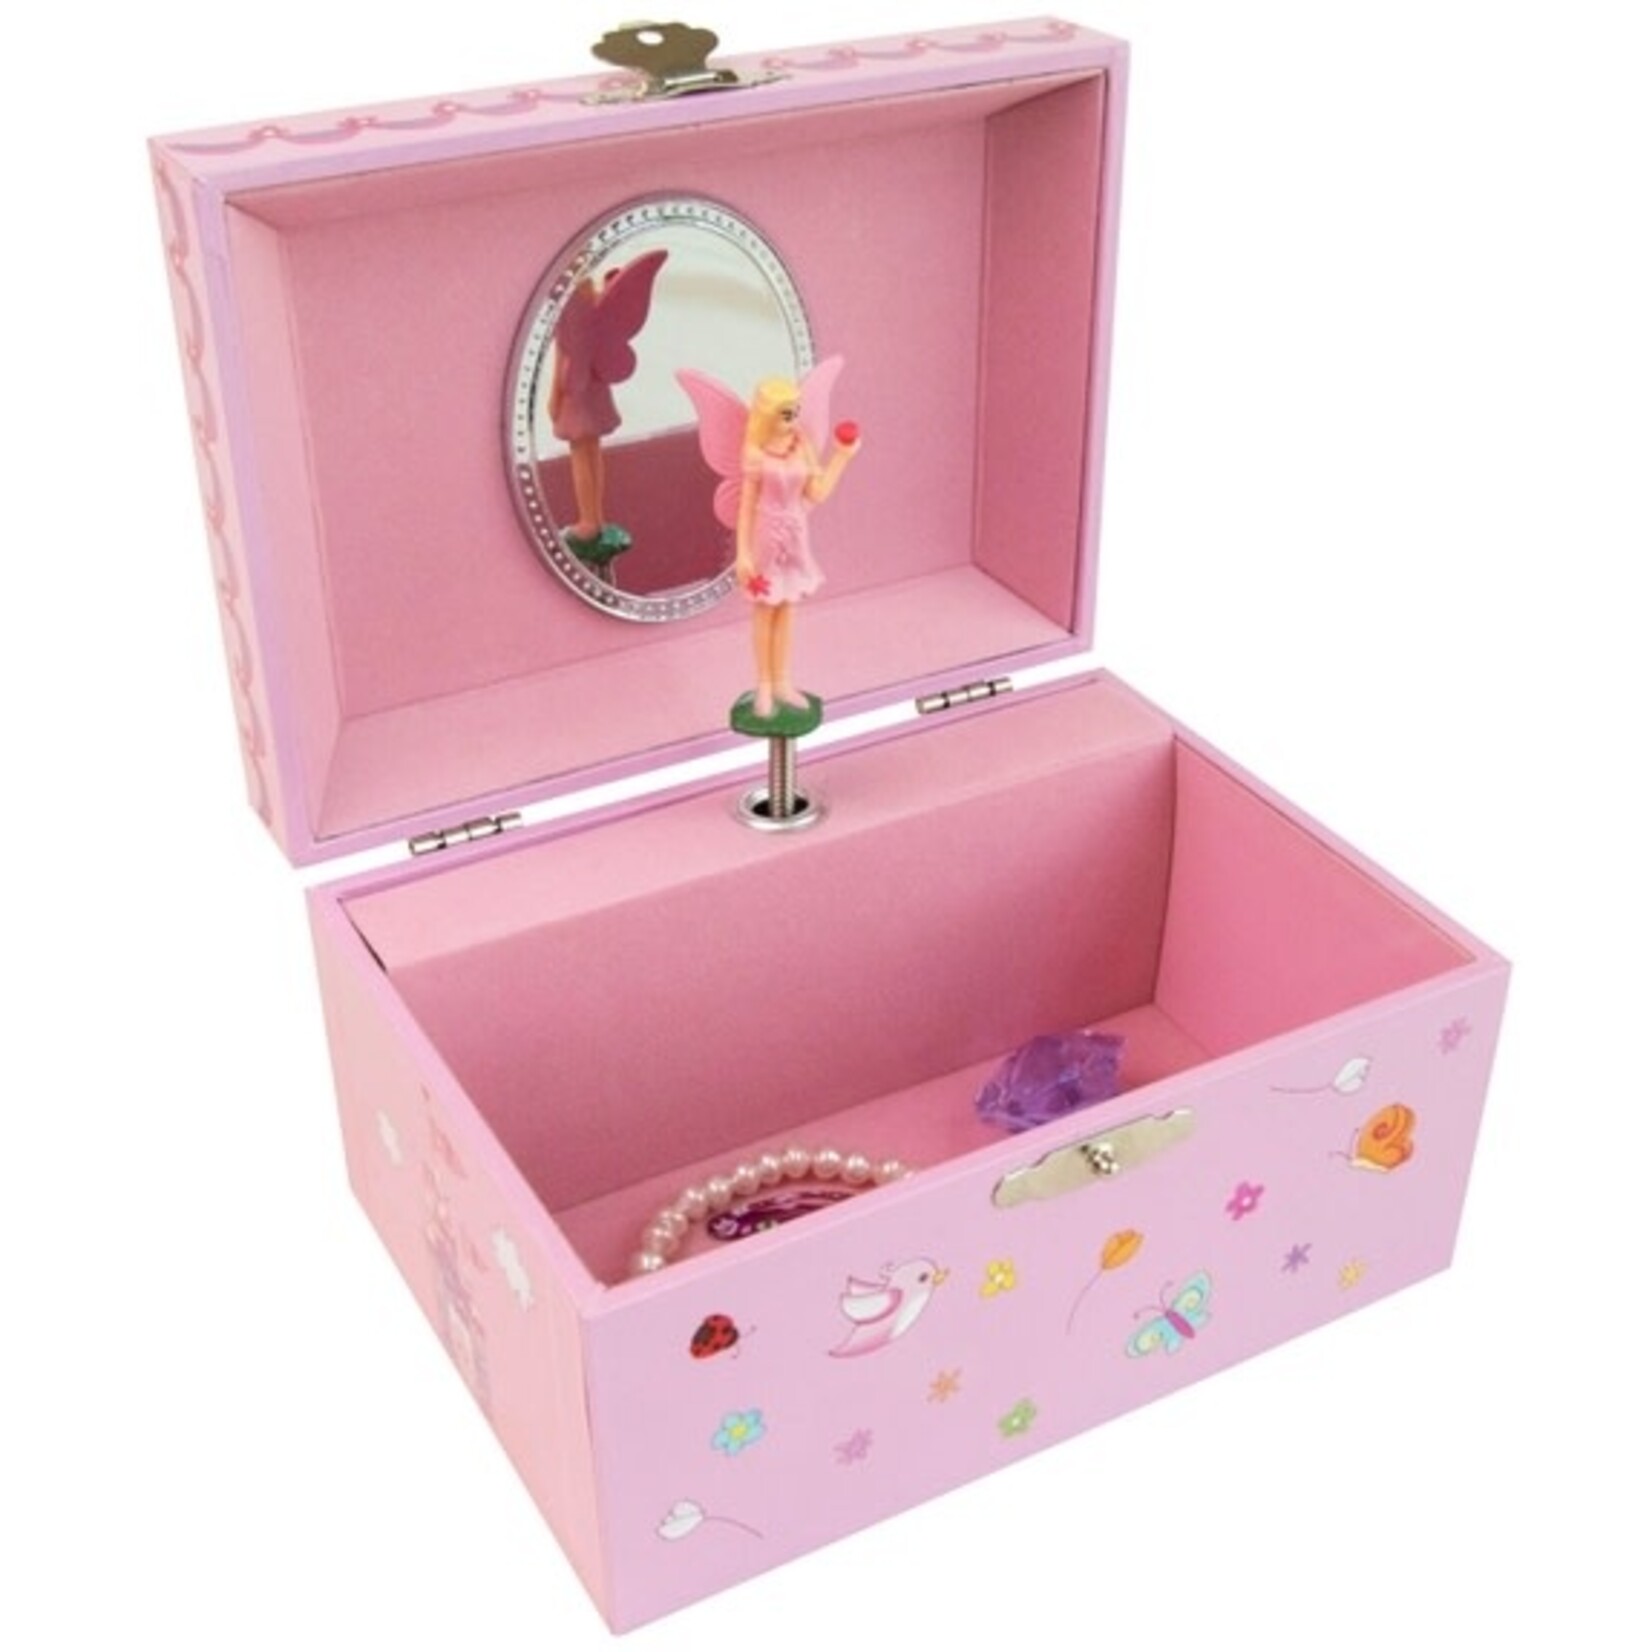 Mele and Co Mele and Co Krista Musical Fairy Jewelry Box Waltz Flowers